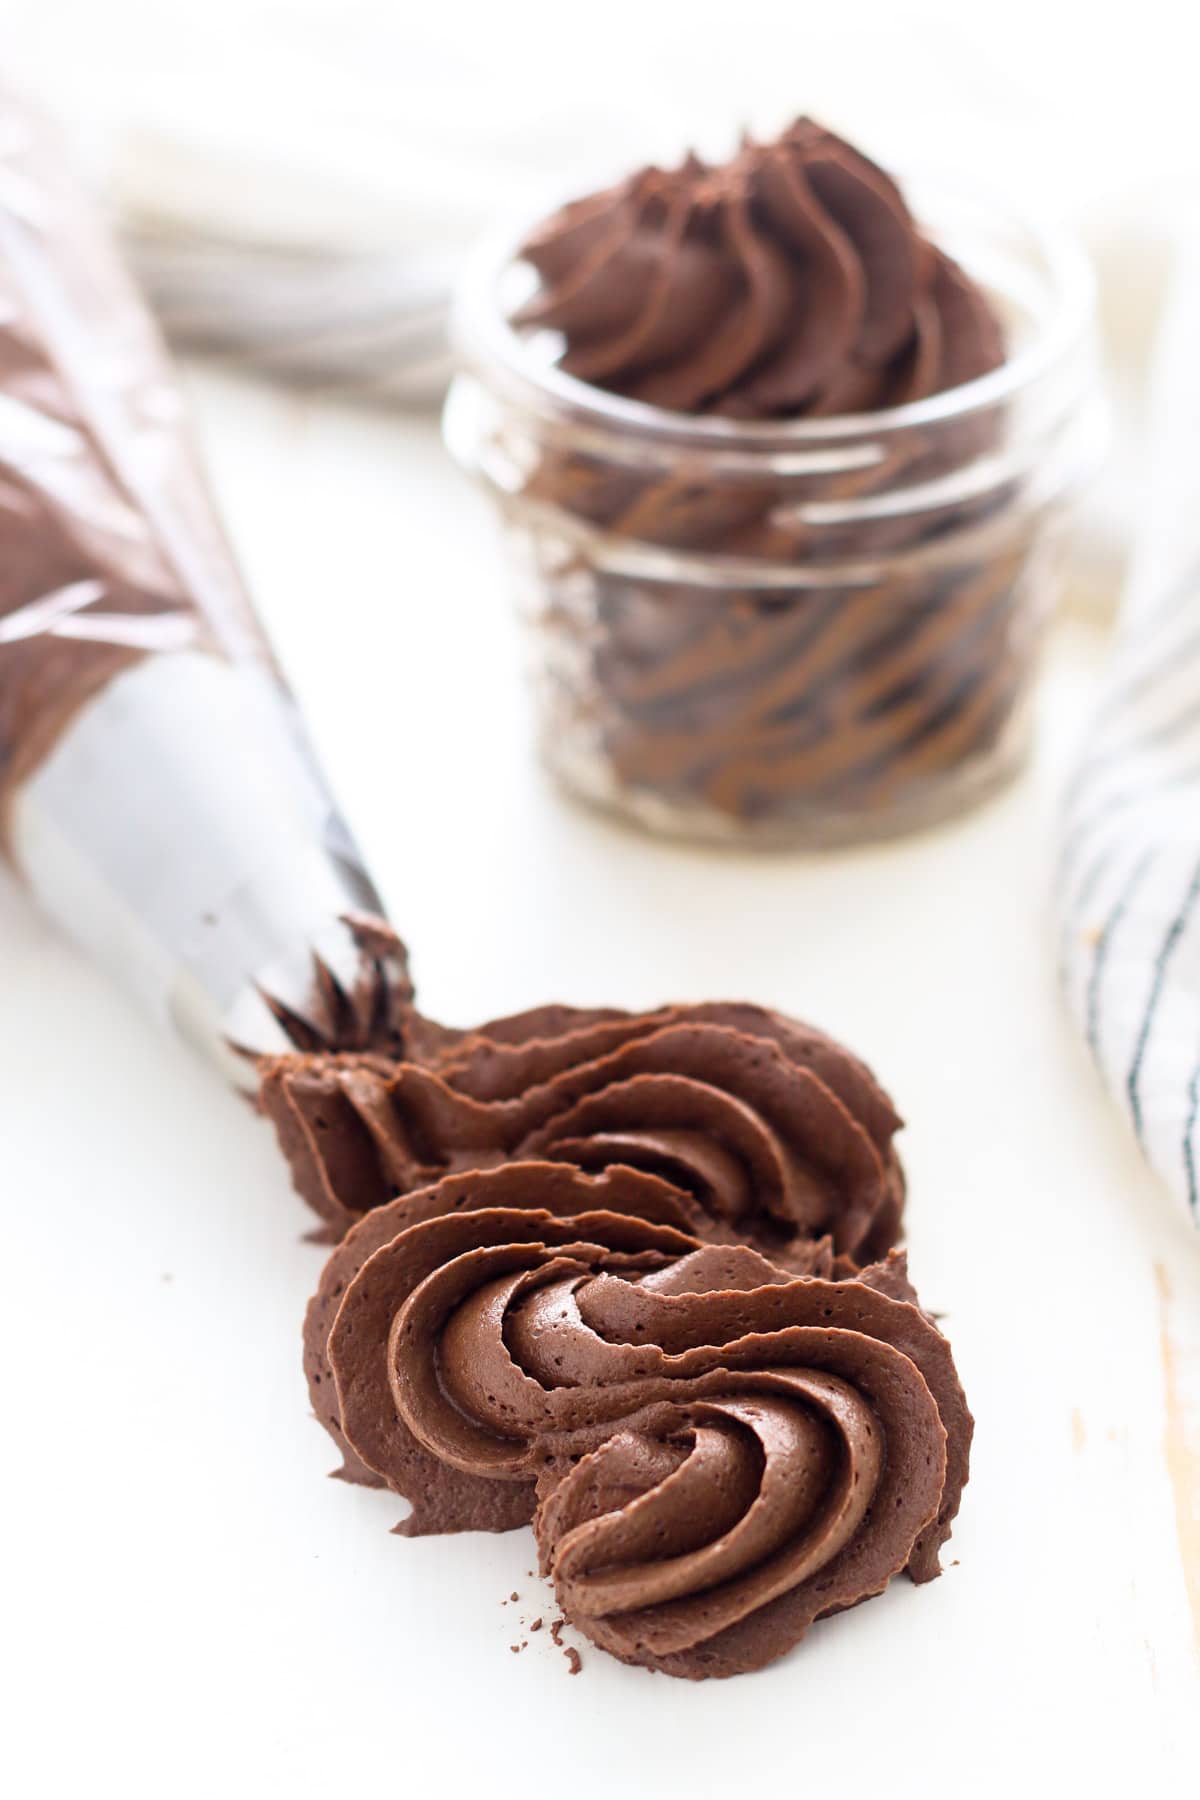 A piping tip pipes a squiggle of chocolate fudge frosting onto a white surface, with a jar of piped frosting in the background.